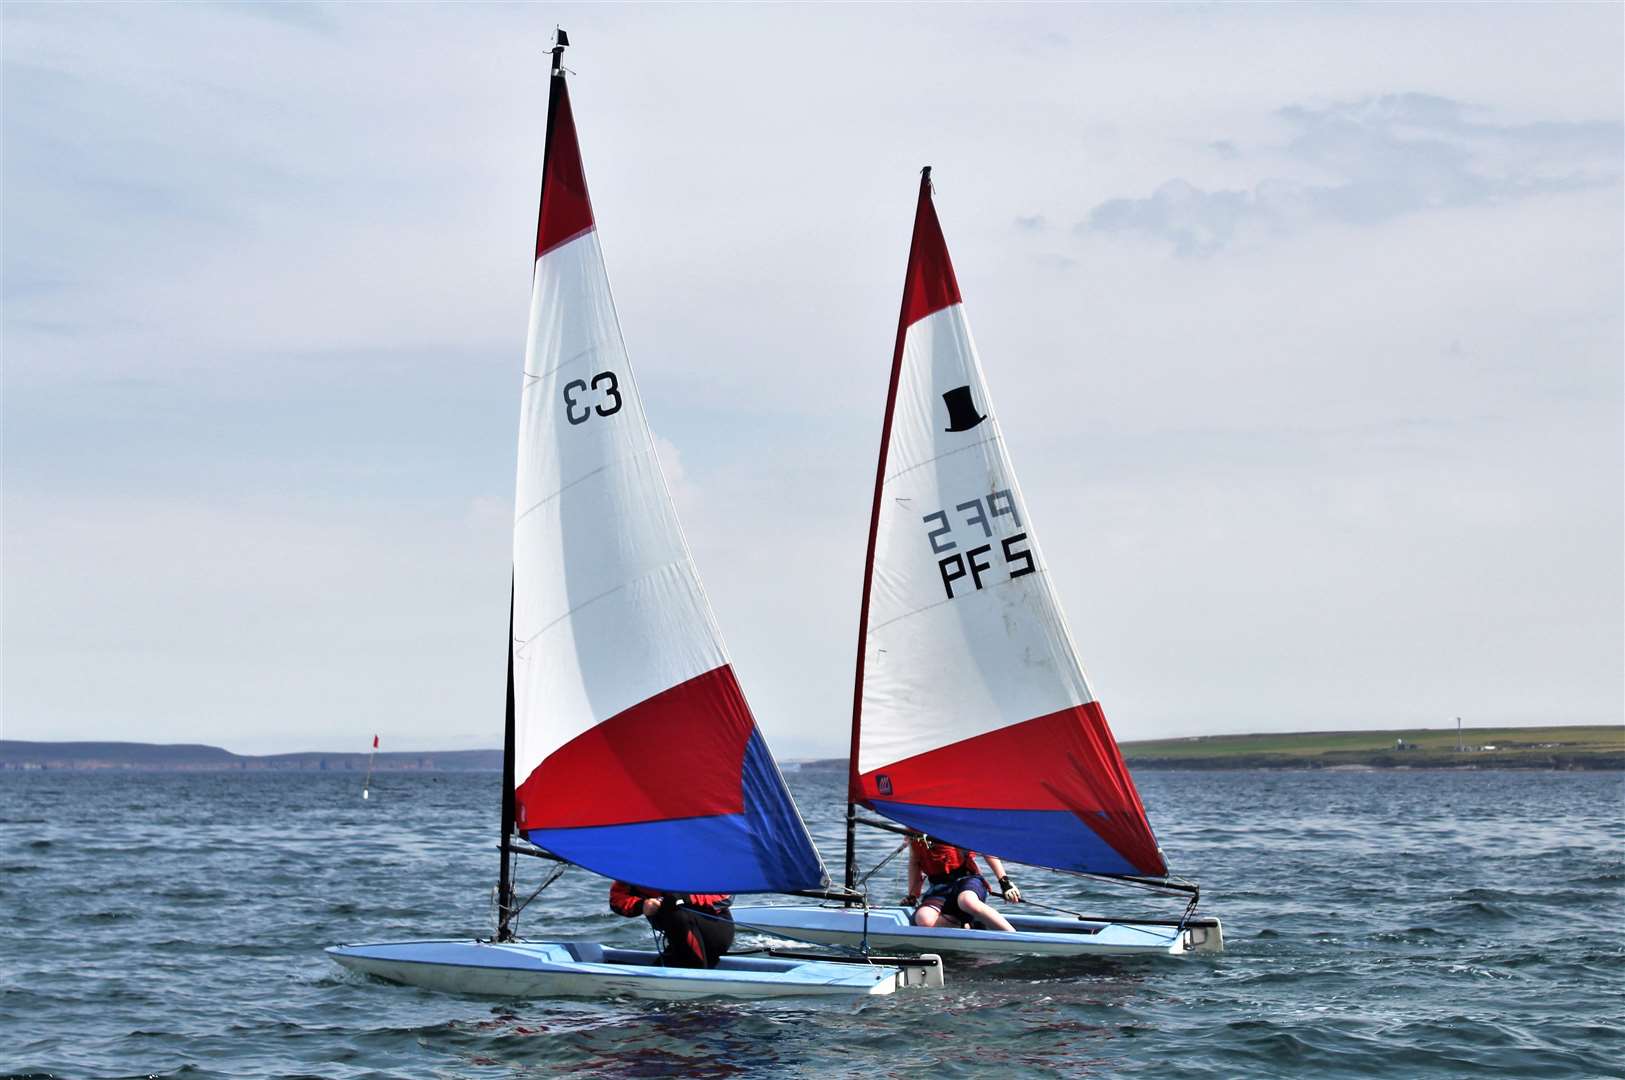 Sunny conditions at Pentland Firth Yacht Club's latest day of racing.